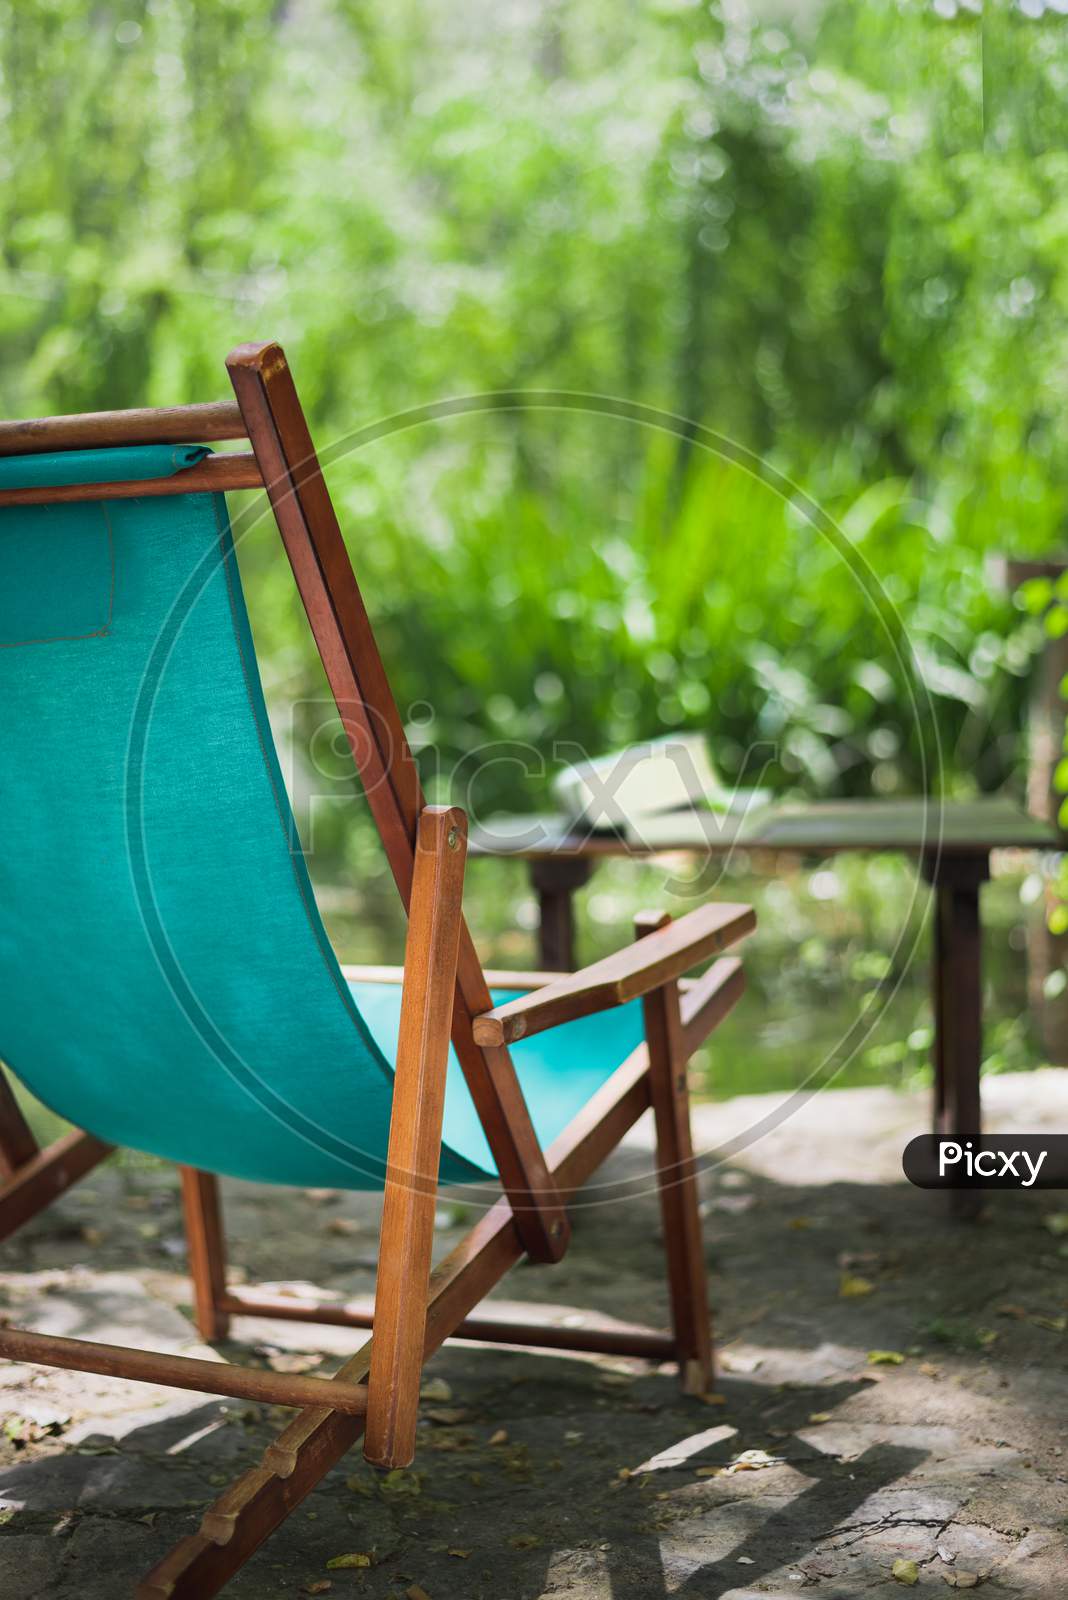 Wooden Beach Chair In The Garden And Some Books On The Table. Relaxing Place Concept.